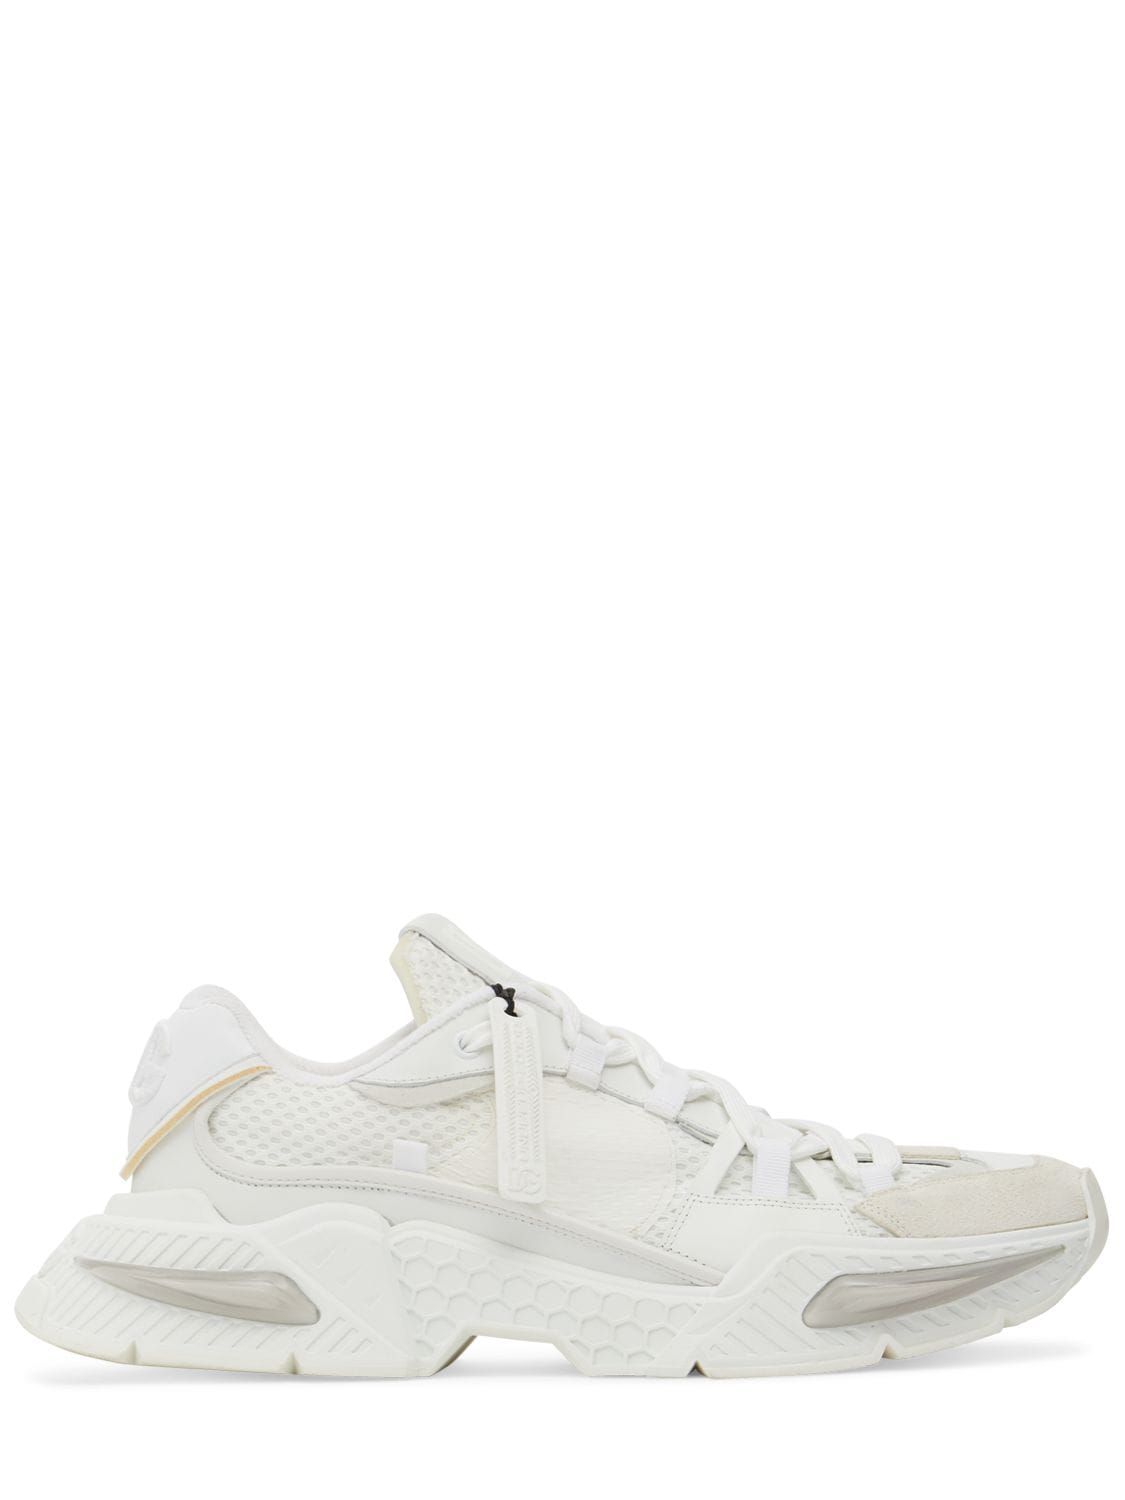 Dolce & Gabbana Airmaster Leather & Tech Sneakers In White